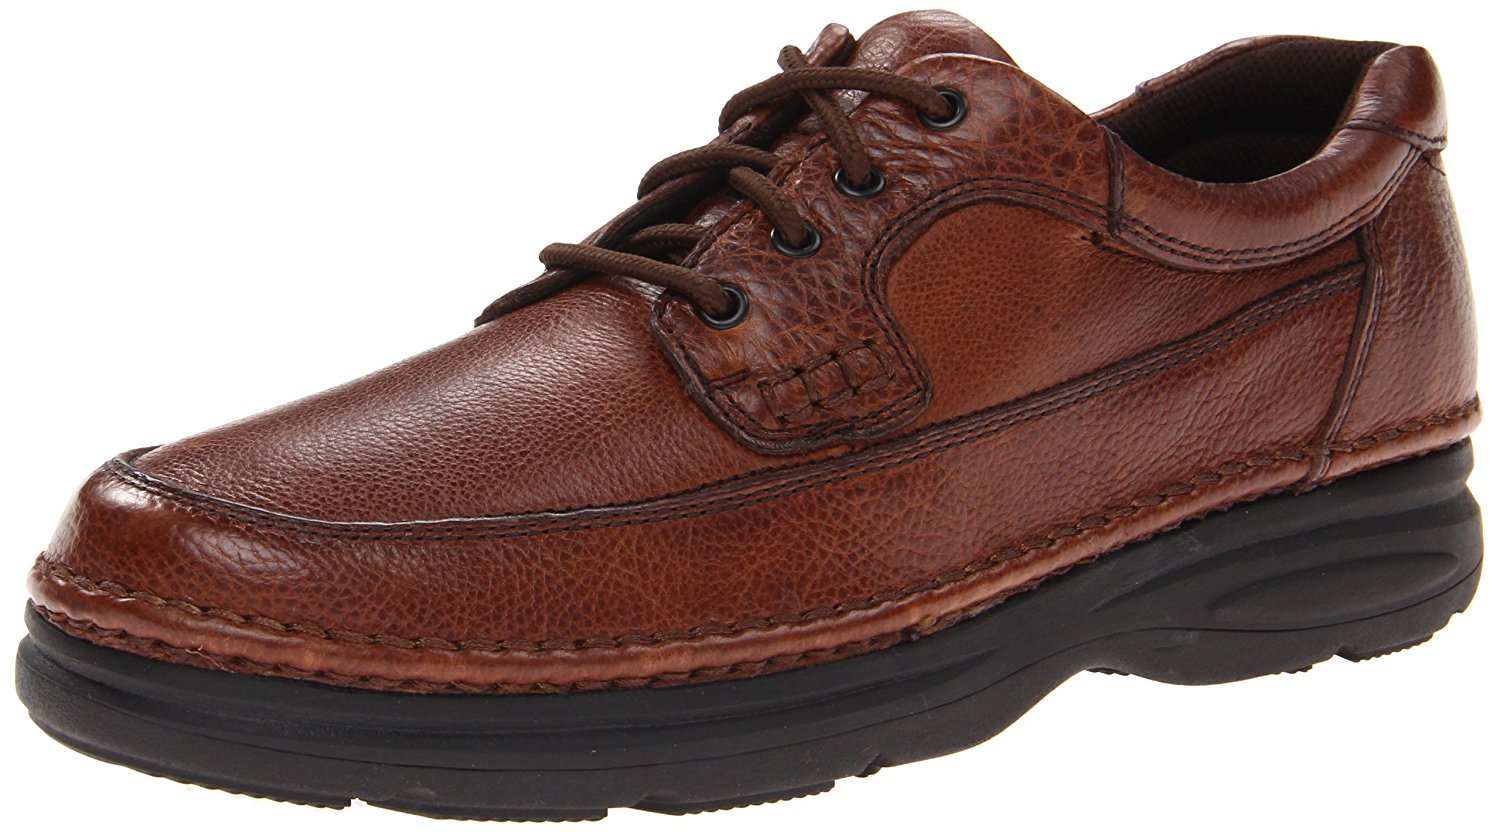 Nunn Bush Mens Cameron Leather Lace Up Casual Oxfords, Brown, Size 10.5 ...